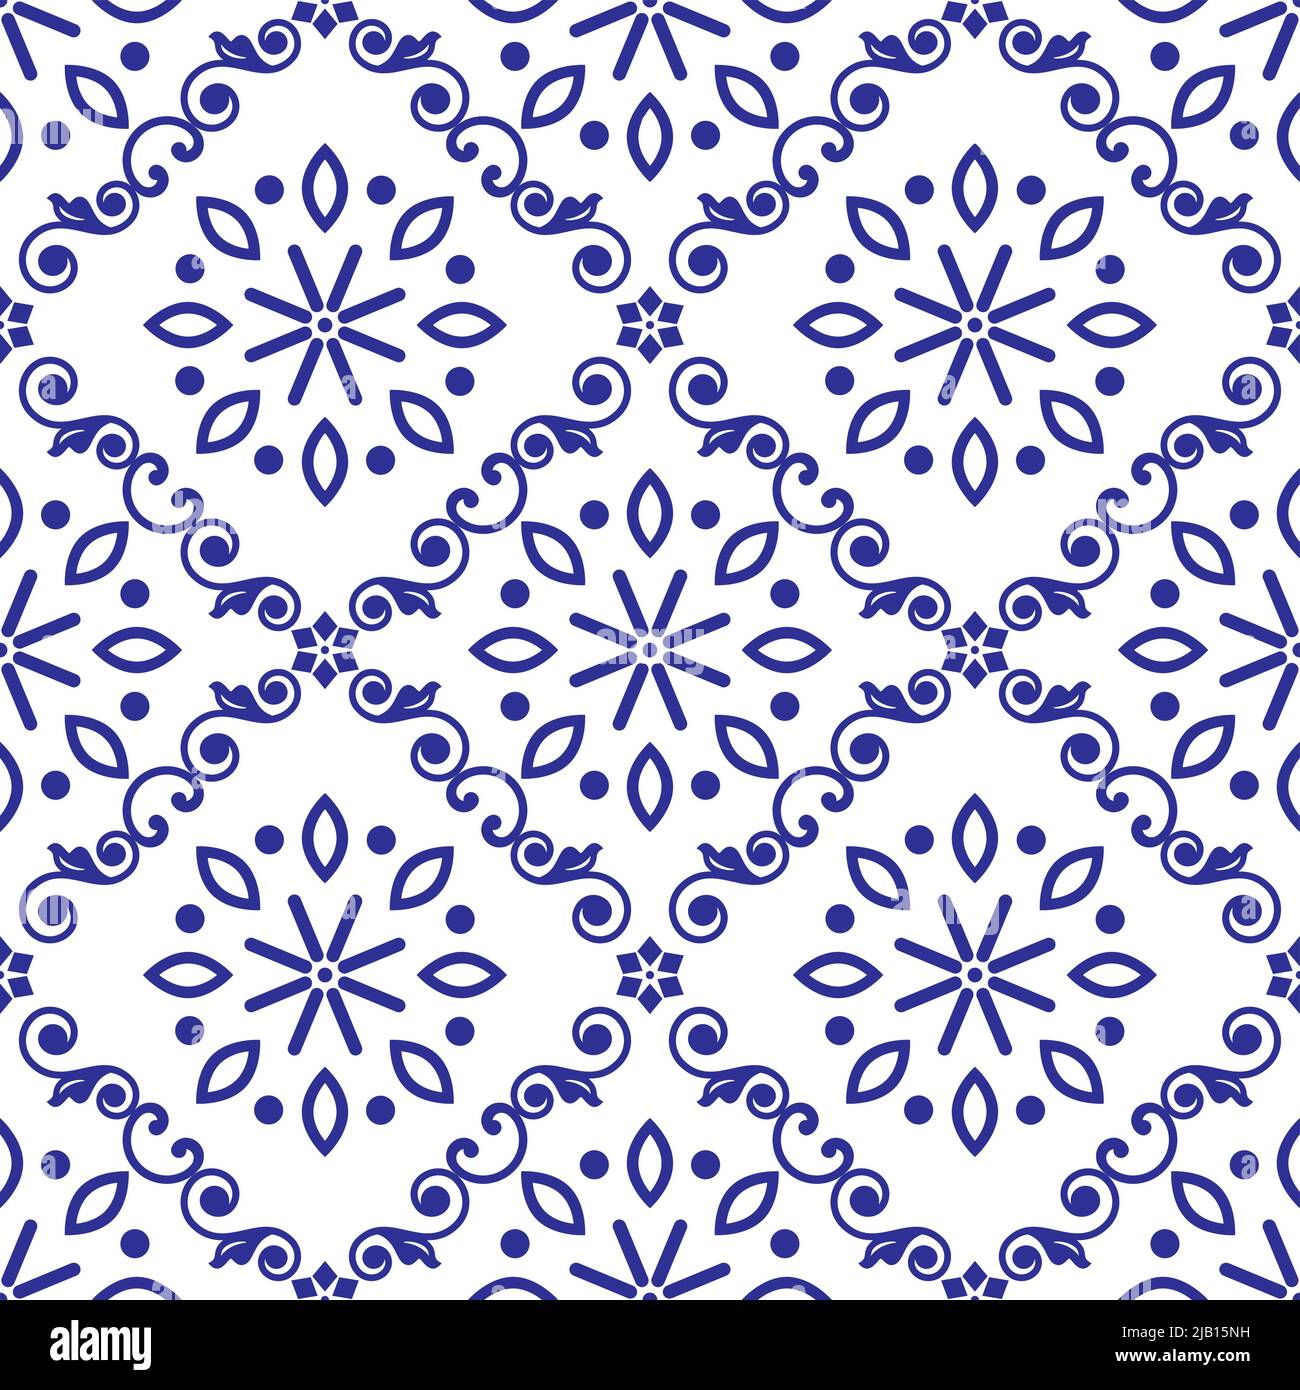 Lisbon style Azulejo tile seamless vector in indigo or navy blue with flowers and leaves, repetitive design inspired by art from Portugal Stock Vector